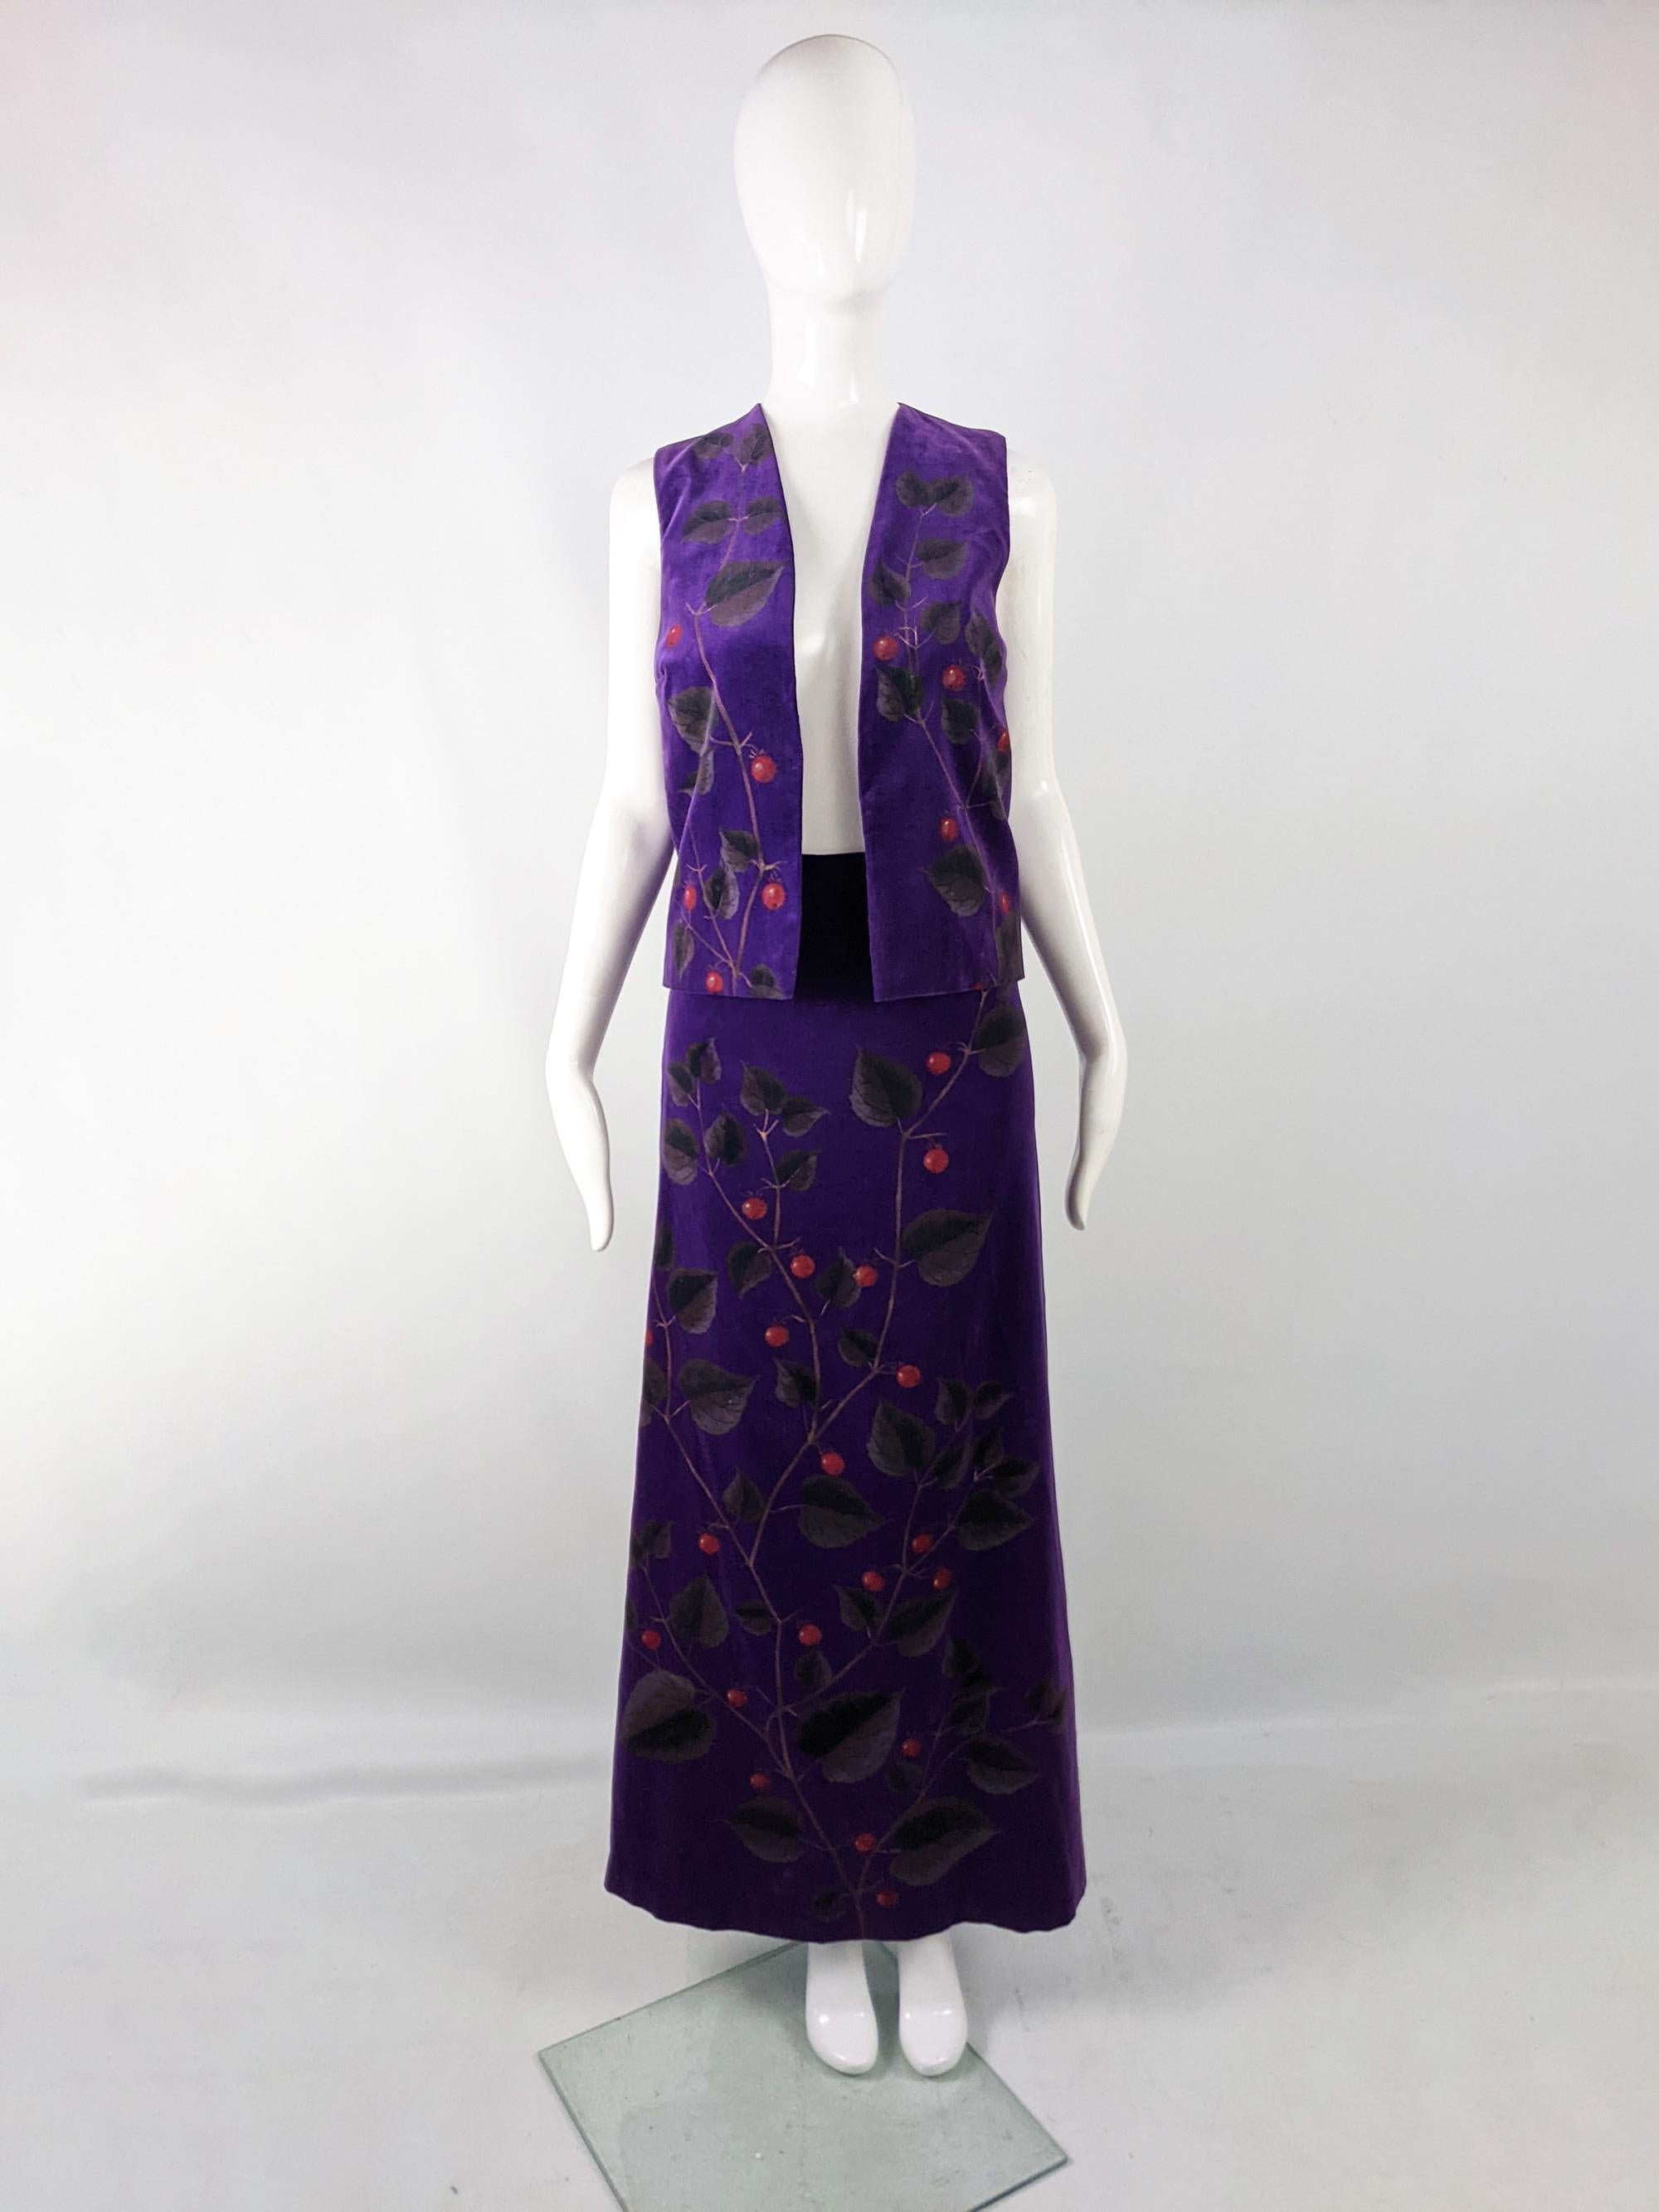 An incredible vintage womens two piece suit from the 70s by British designer Elizabeth Thirlby for luxury department store, Harrods. In a purple cotton velvet with a striking hand printed botanical print throughout. This set consists of an open